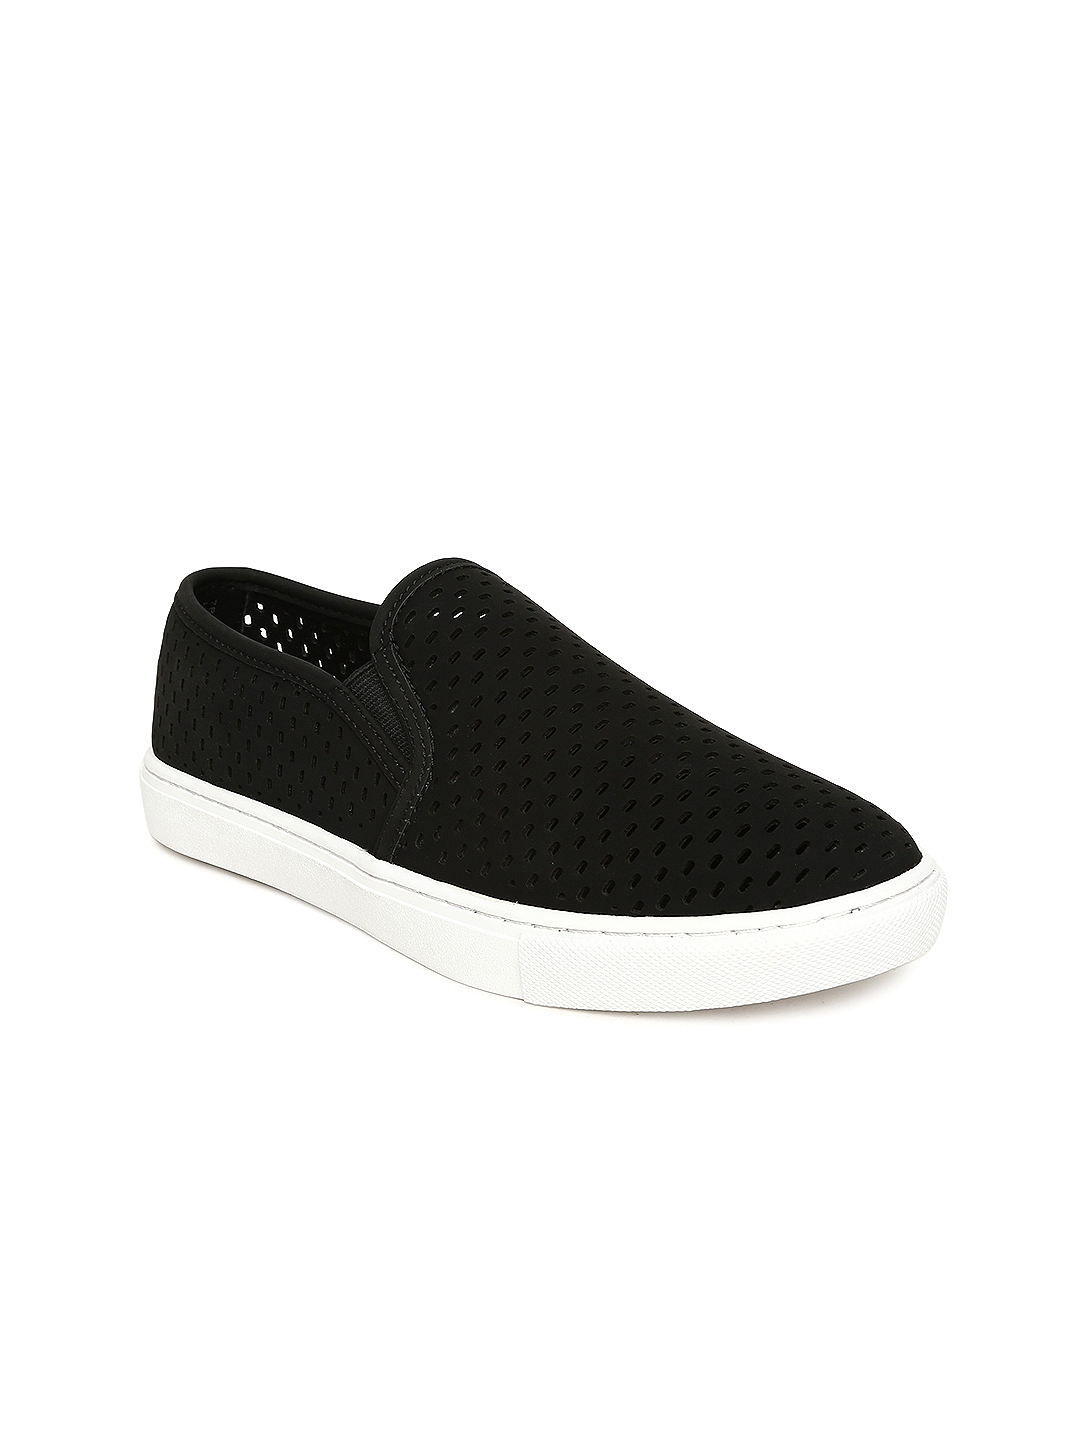 Buy Steve Madden Women Black ELOUISE Slip On Sneakers With Cut Out ...